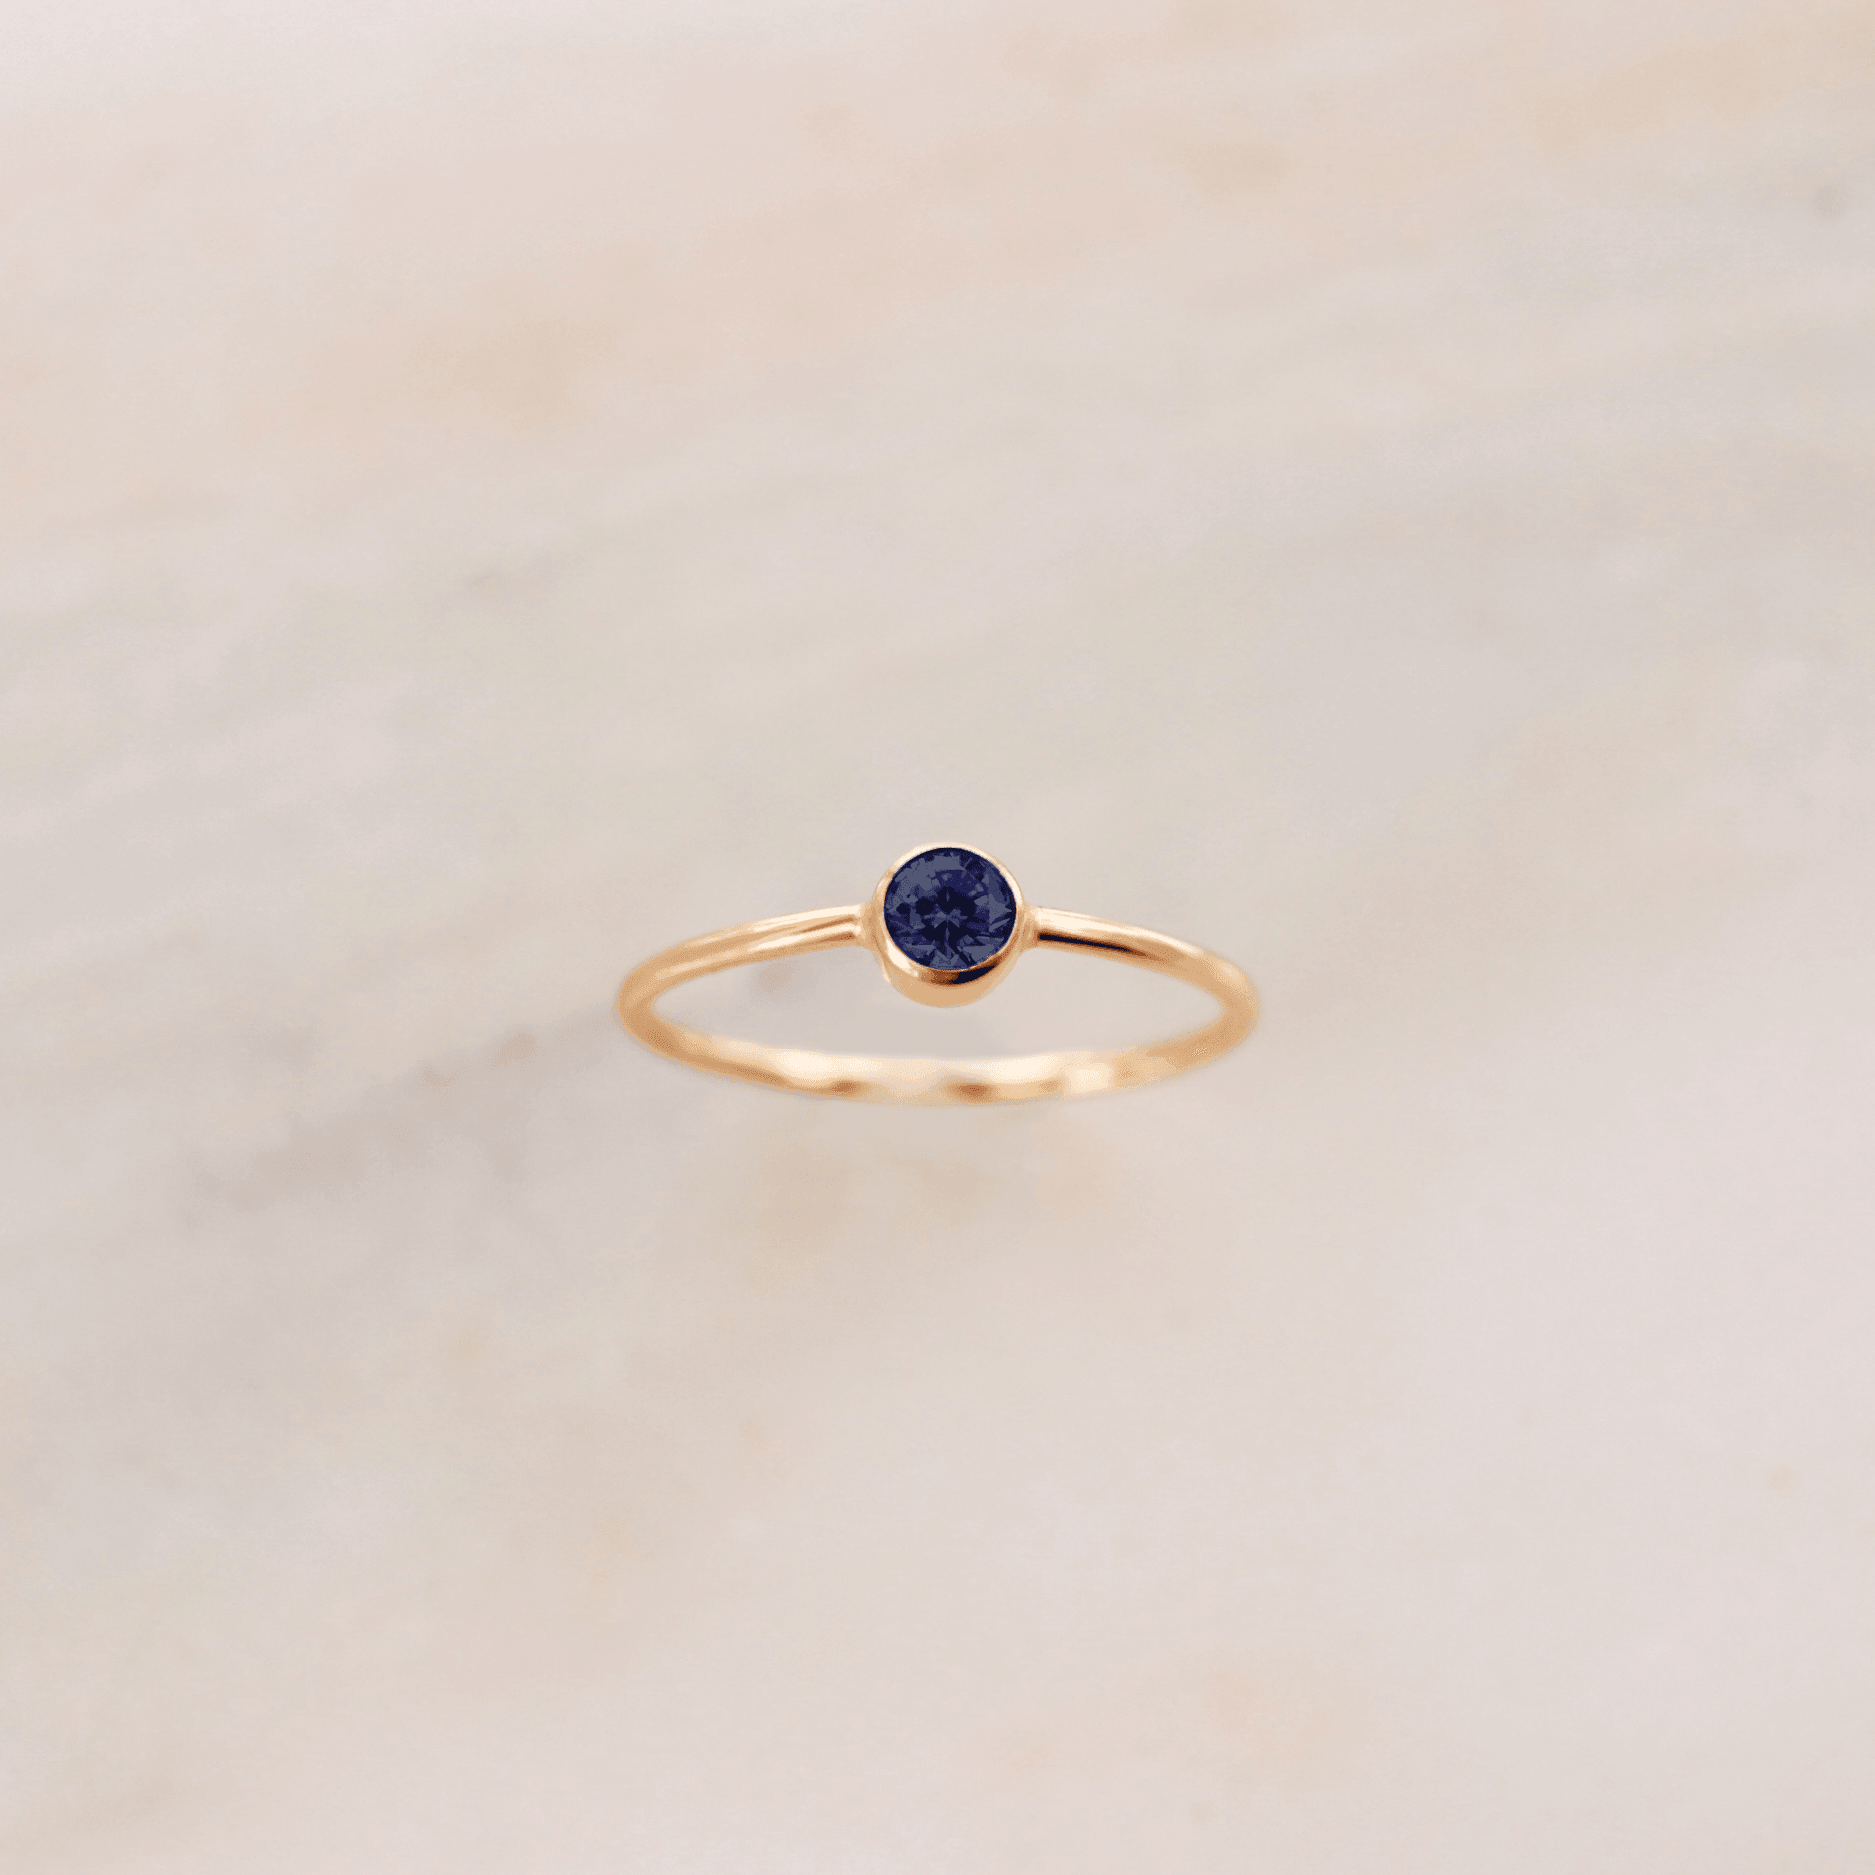 September Birthstone Ring ∙ Sapphire - Nolia Jewelry - Meaningful + Sustainably Handcrafted Jewelry